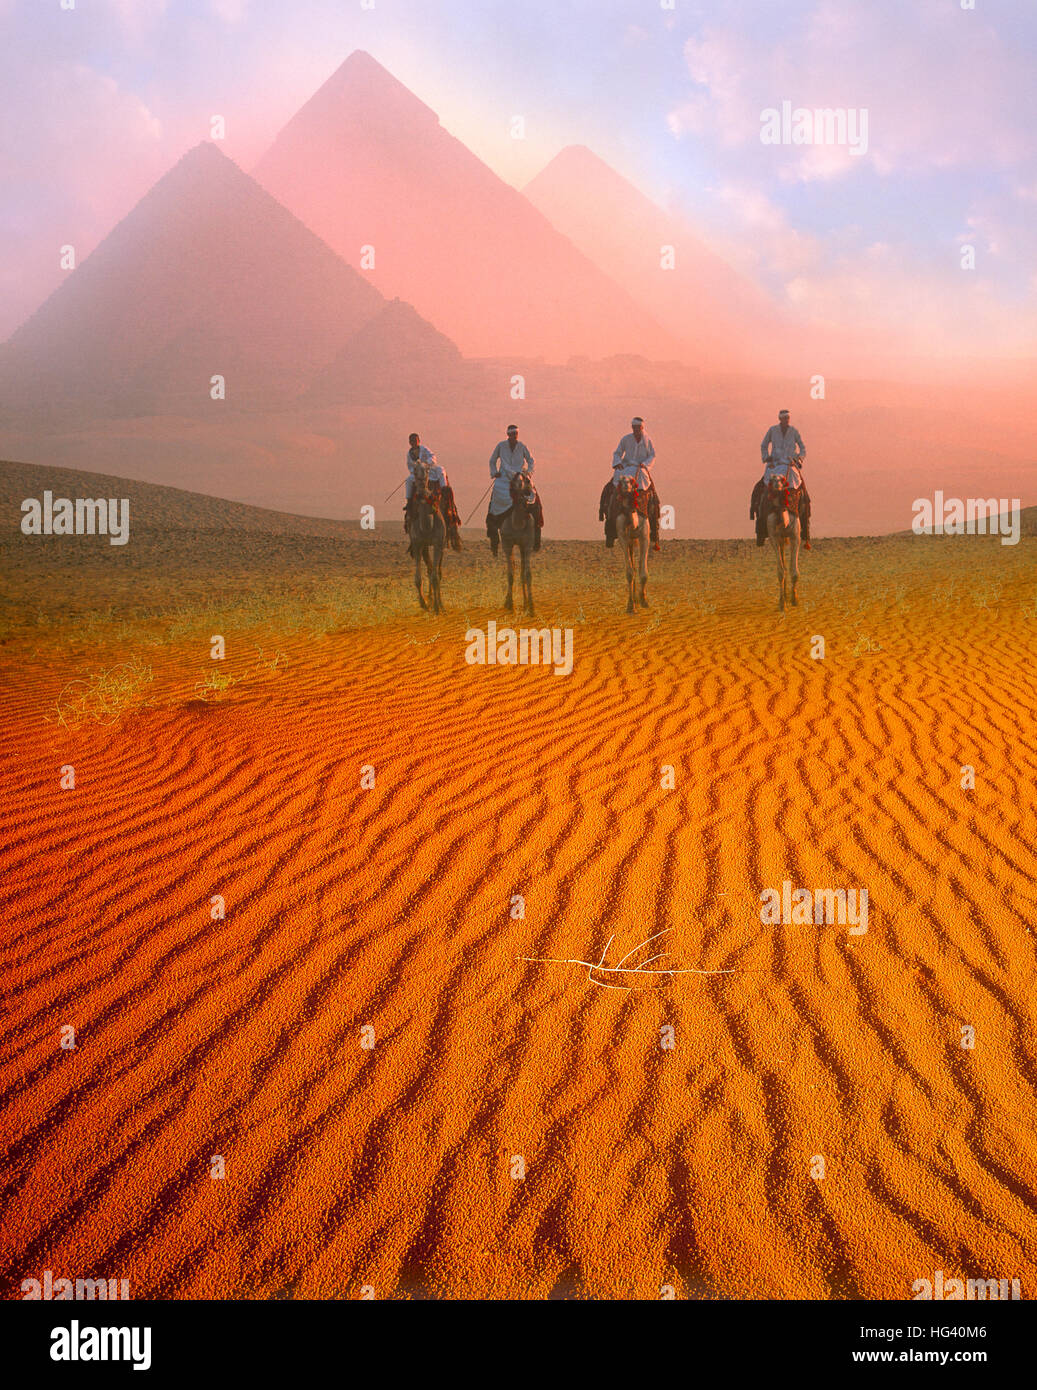 Pyramids and four camel riders at dawn, Giza, Cairo, Egypt Stock Photo